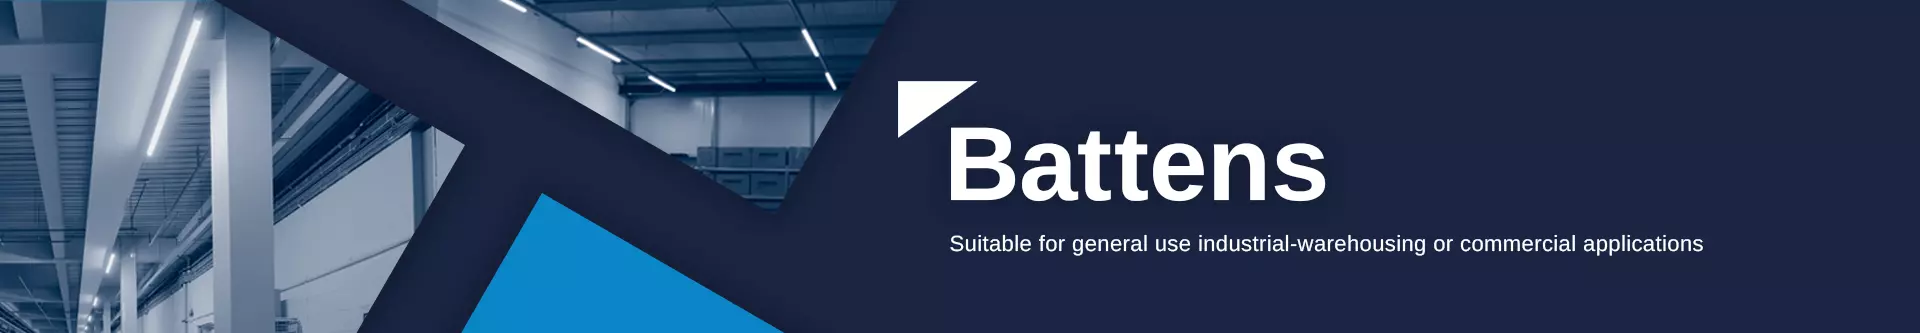 battens product type